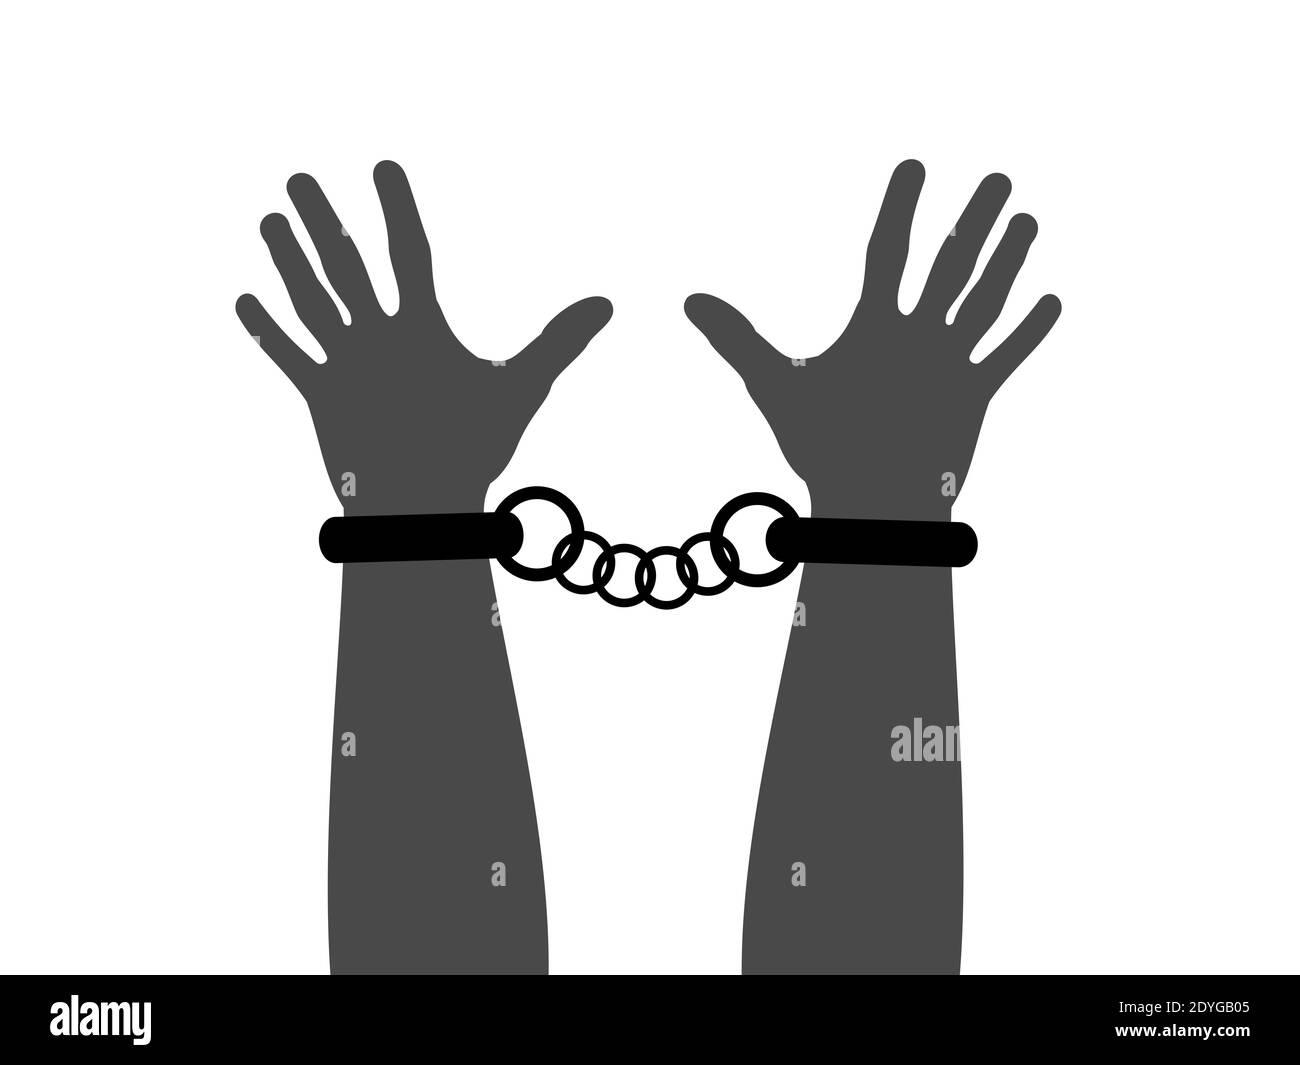 Criminal is wearing cuffs and handcuffs on wrist, hand and arm. Imprisonment because of crime. Vector illustration Stock Photo